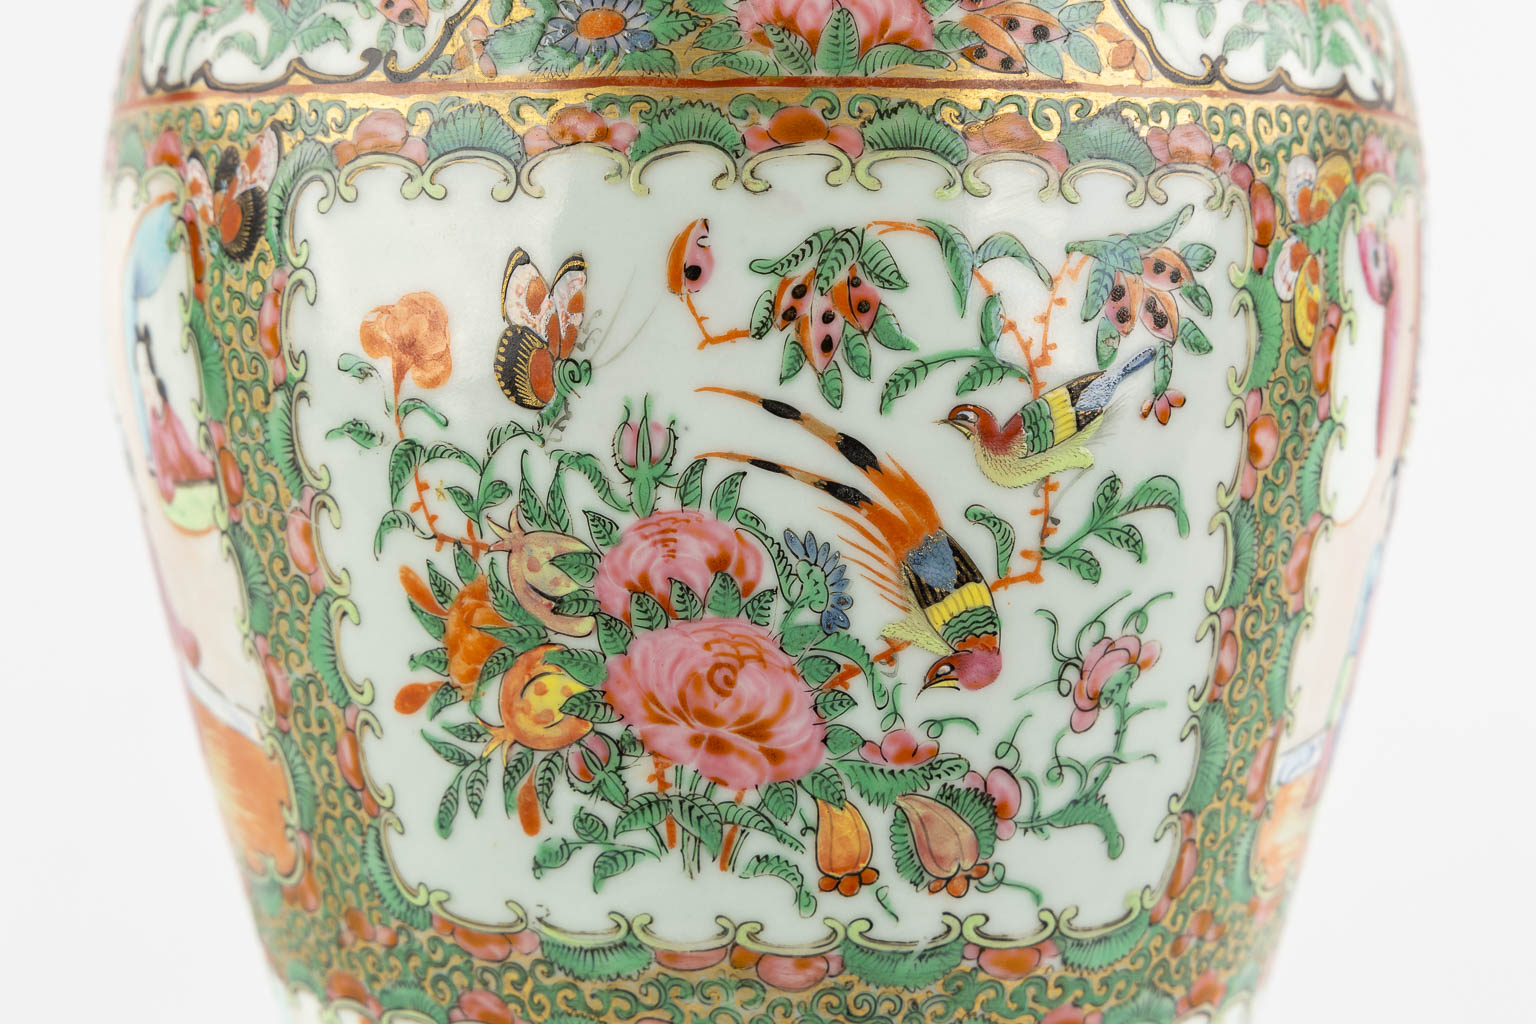 A Chinese Canton vase with a lid, interior scnes with figurines, fauna and flora. 19th/20th C. (H:4 - Image 19 of 19